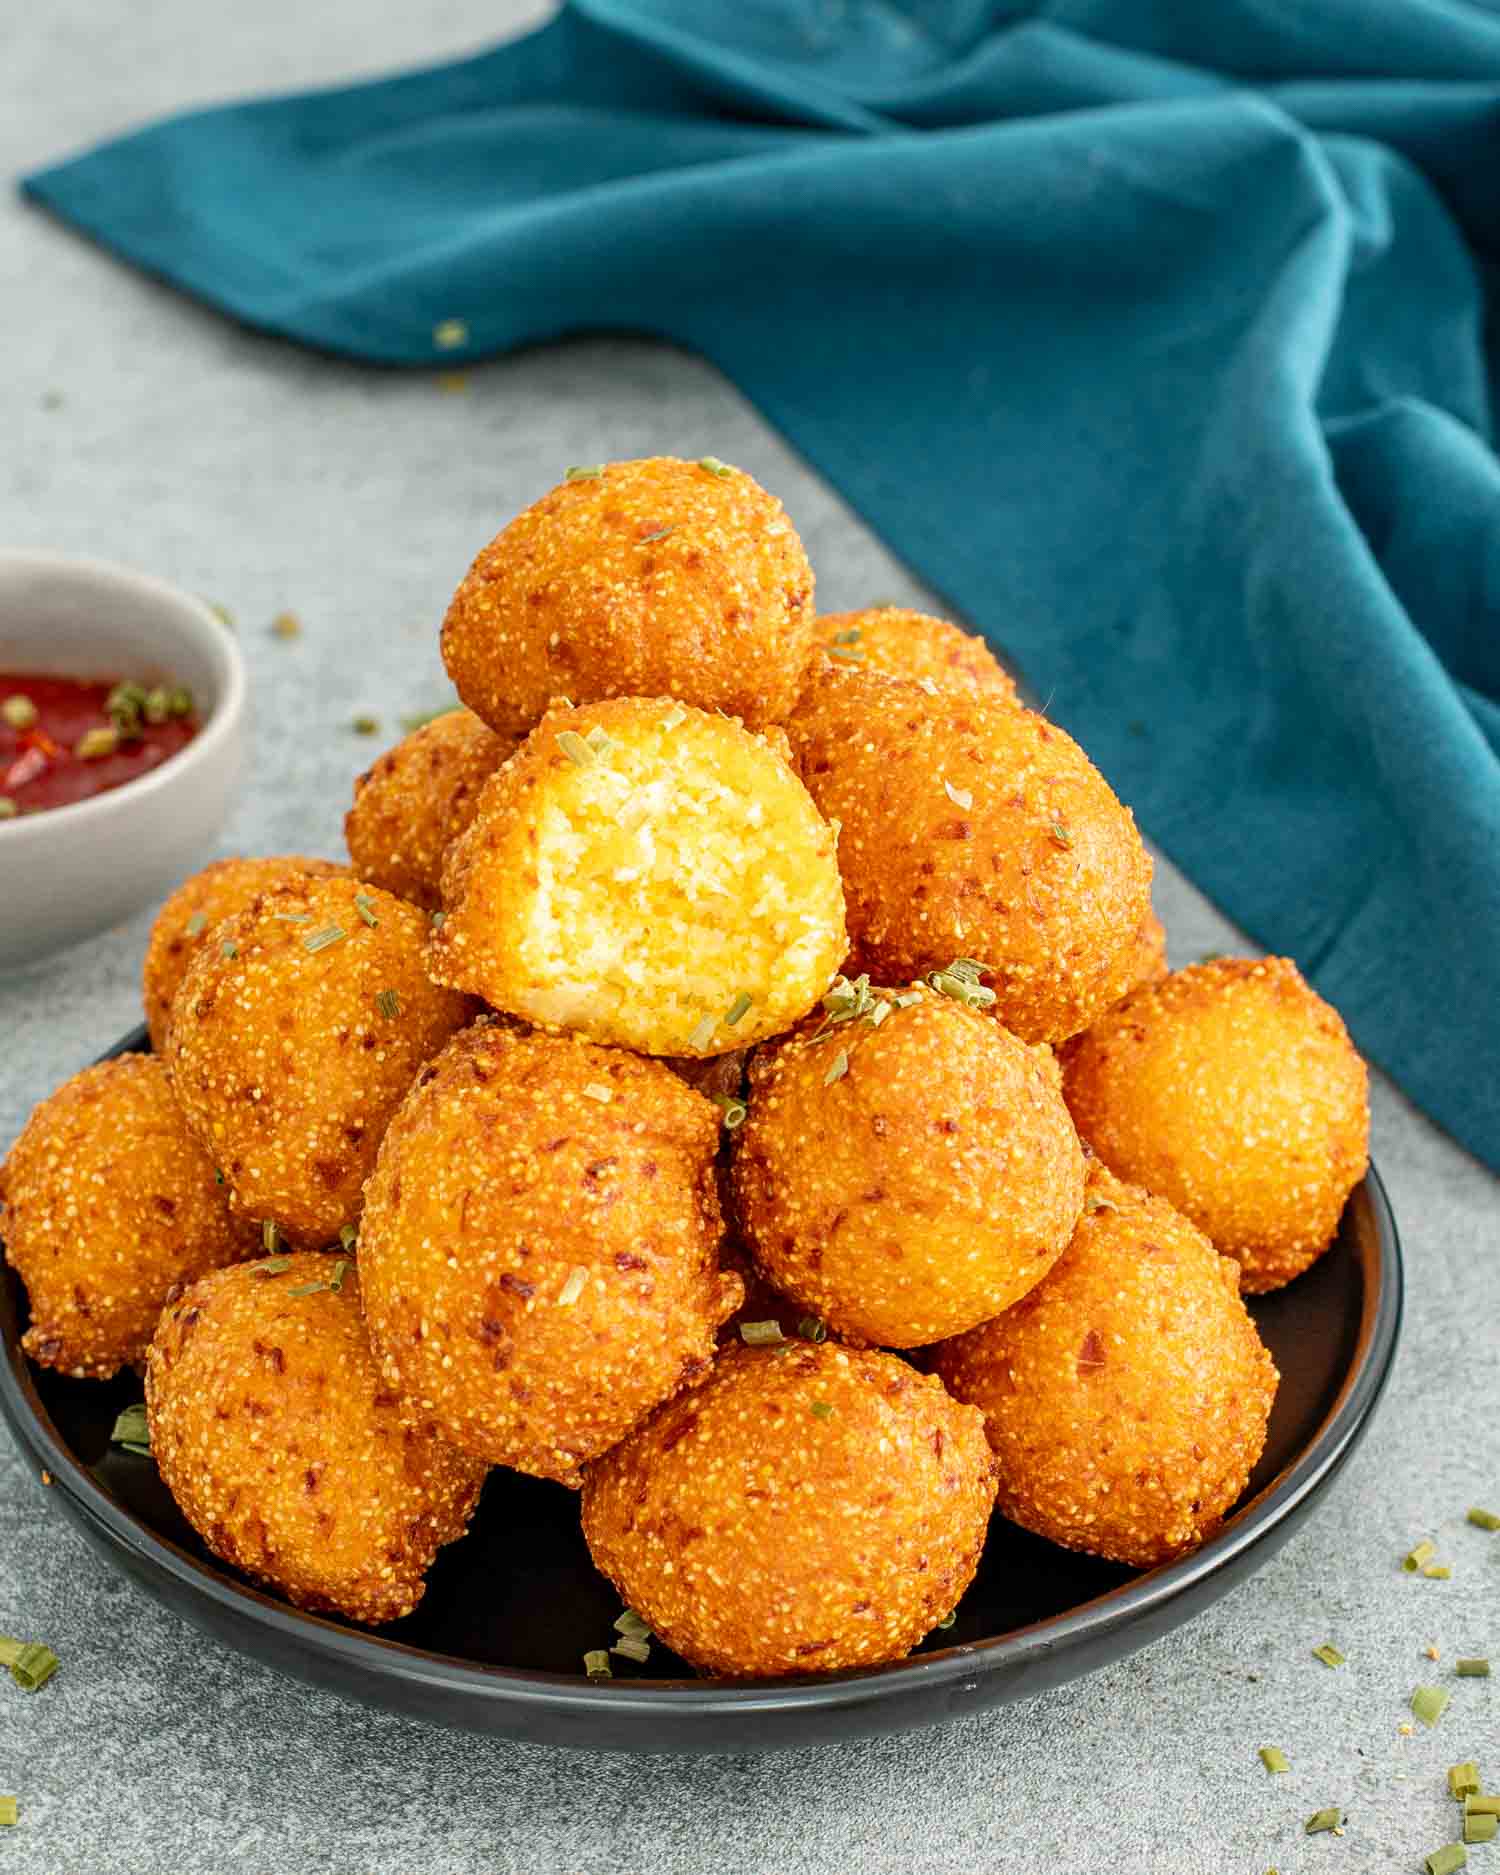 a plate filled with freshly made hush puppies.